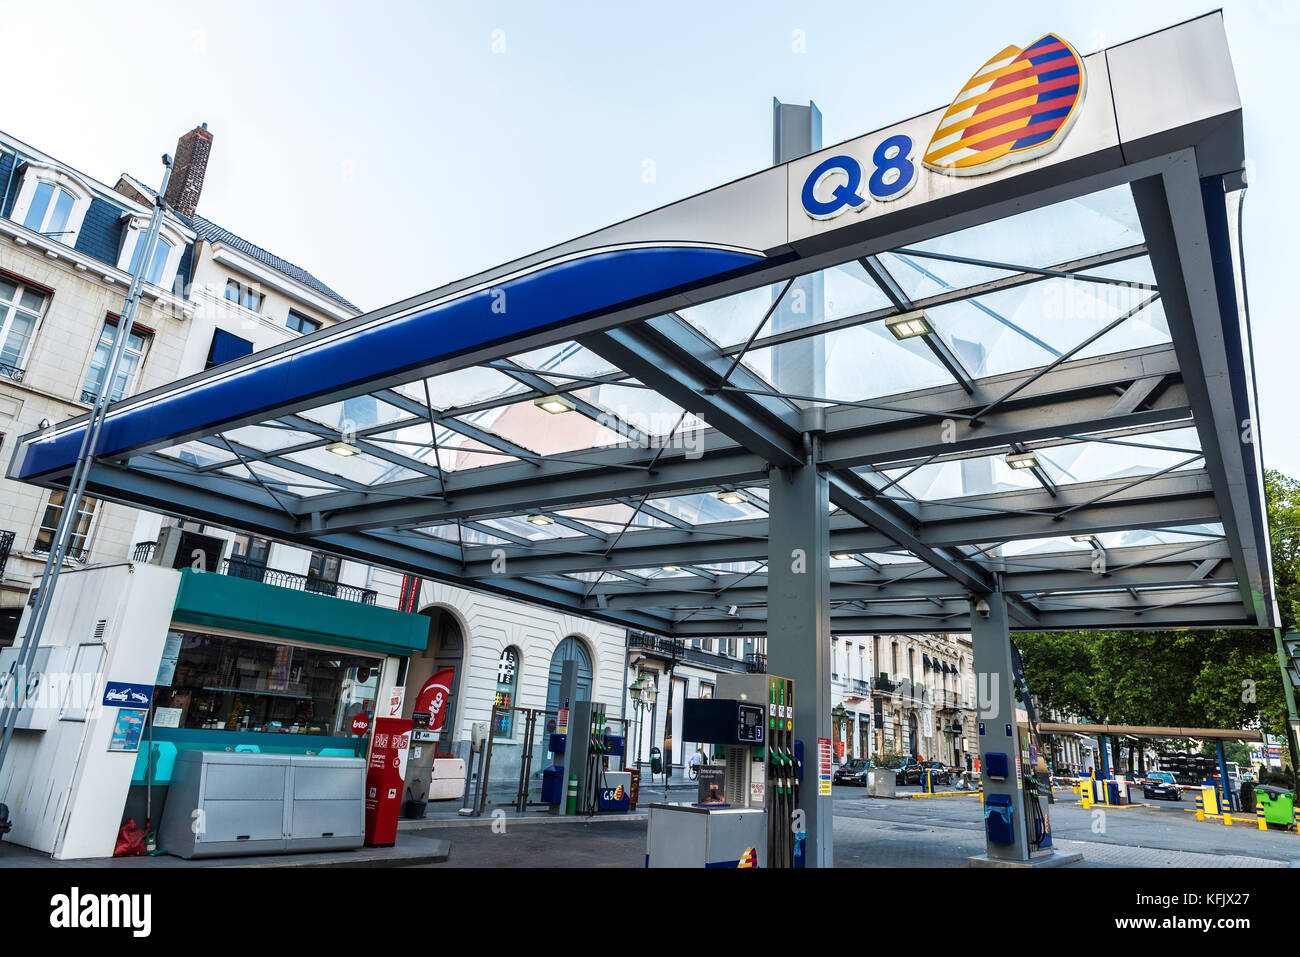 Brussels, Belgium - August 27, 2017: Q8 gas station in the center of Brussels, Belgium Stock Photo